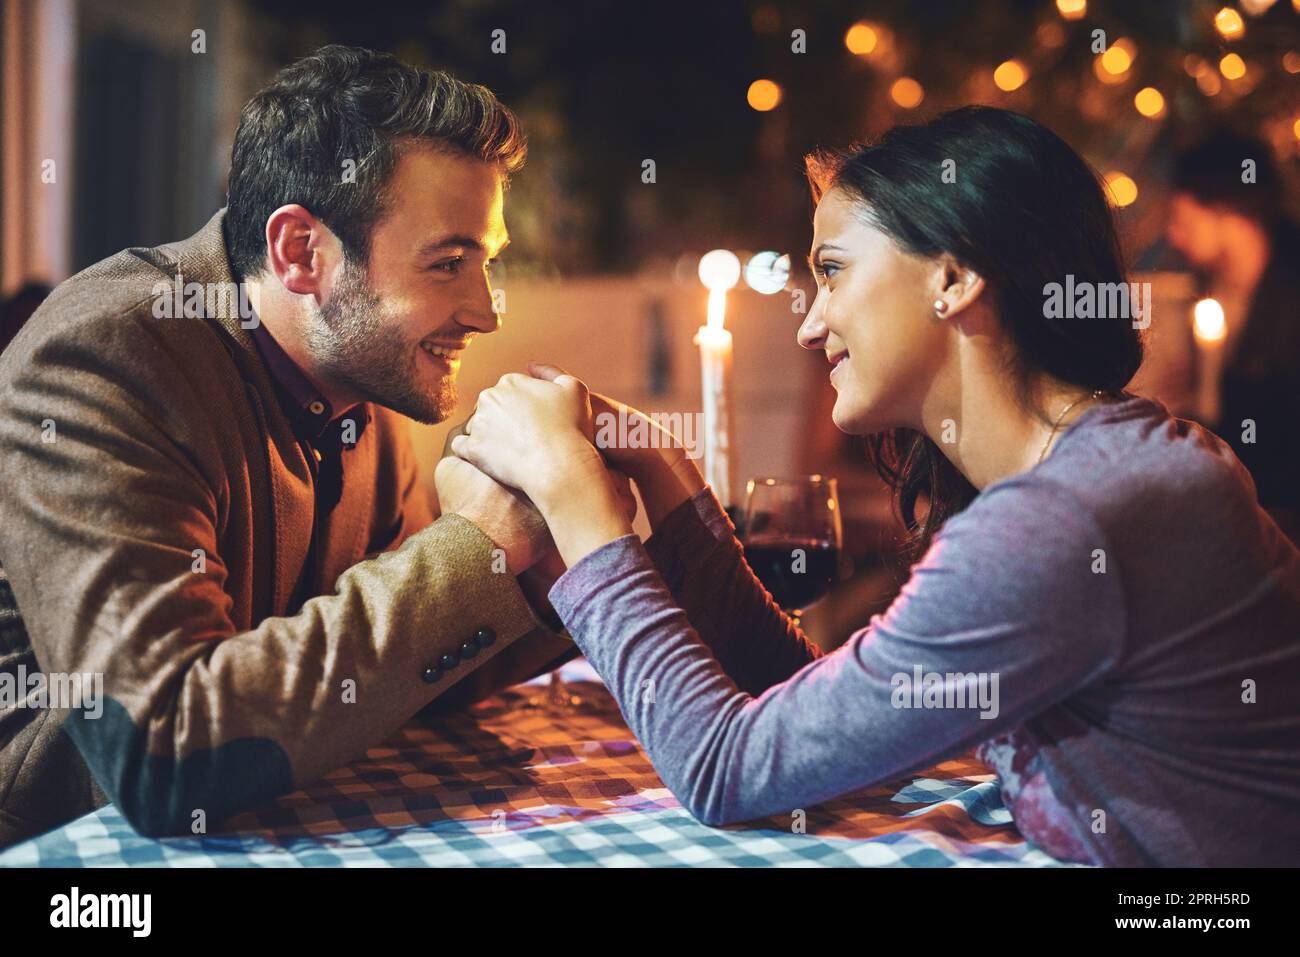 You are all that matters in this moment. an affectionate young couple having a romantic dinner in a restaurant. Stock Photo